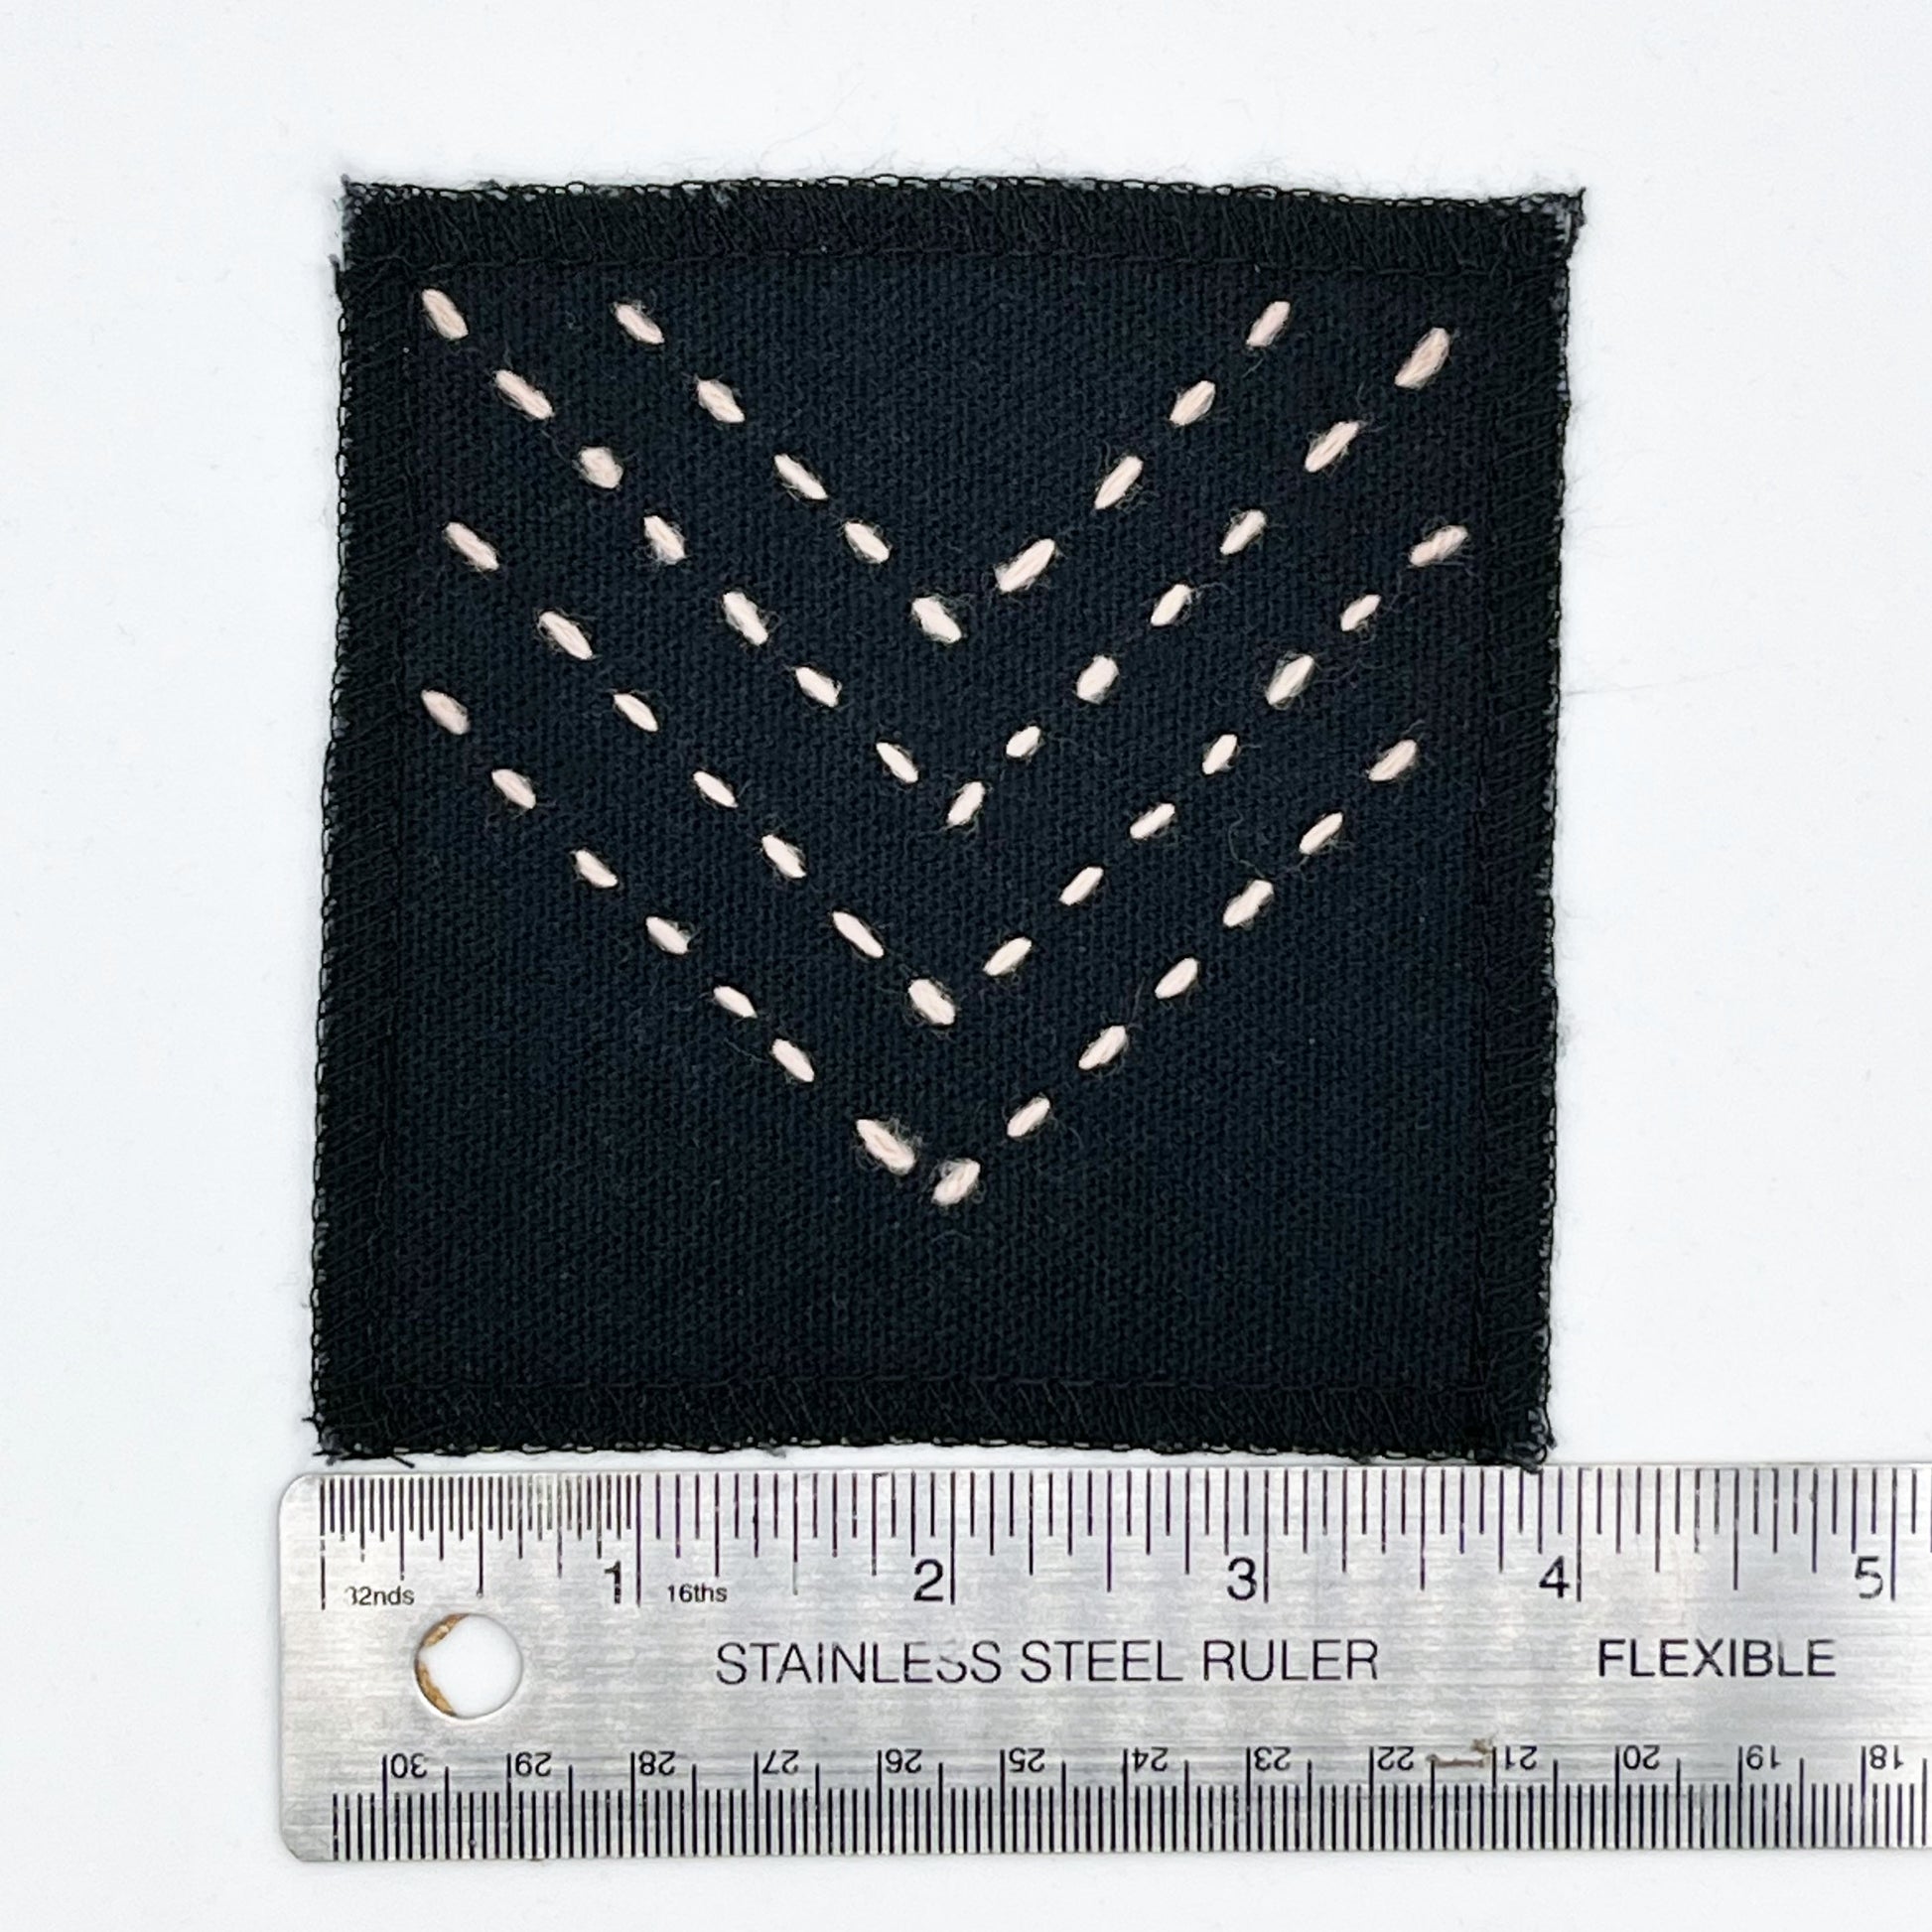 a square patch made out of black canvas, handstitched with rows of peach running stitches in a chevron pattern, with overlocked edges, next to a metal ruler to show a width of 4 inches, on a white background